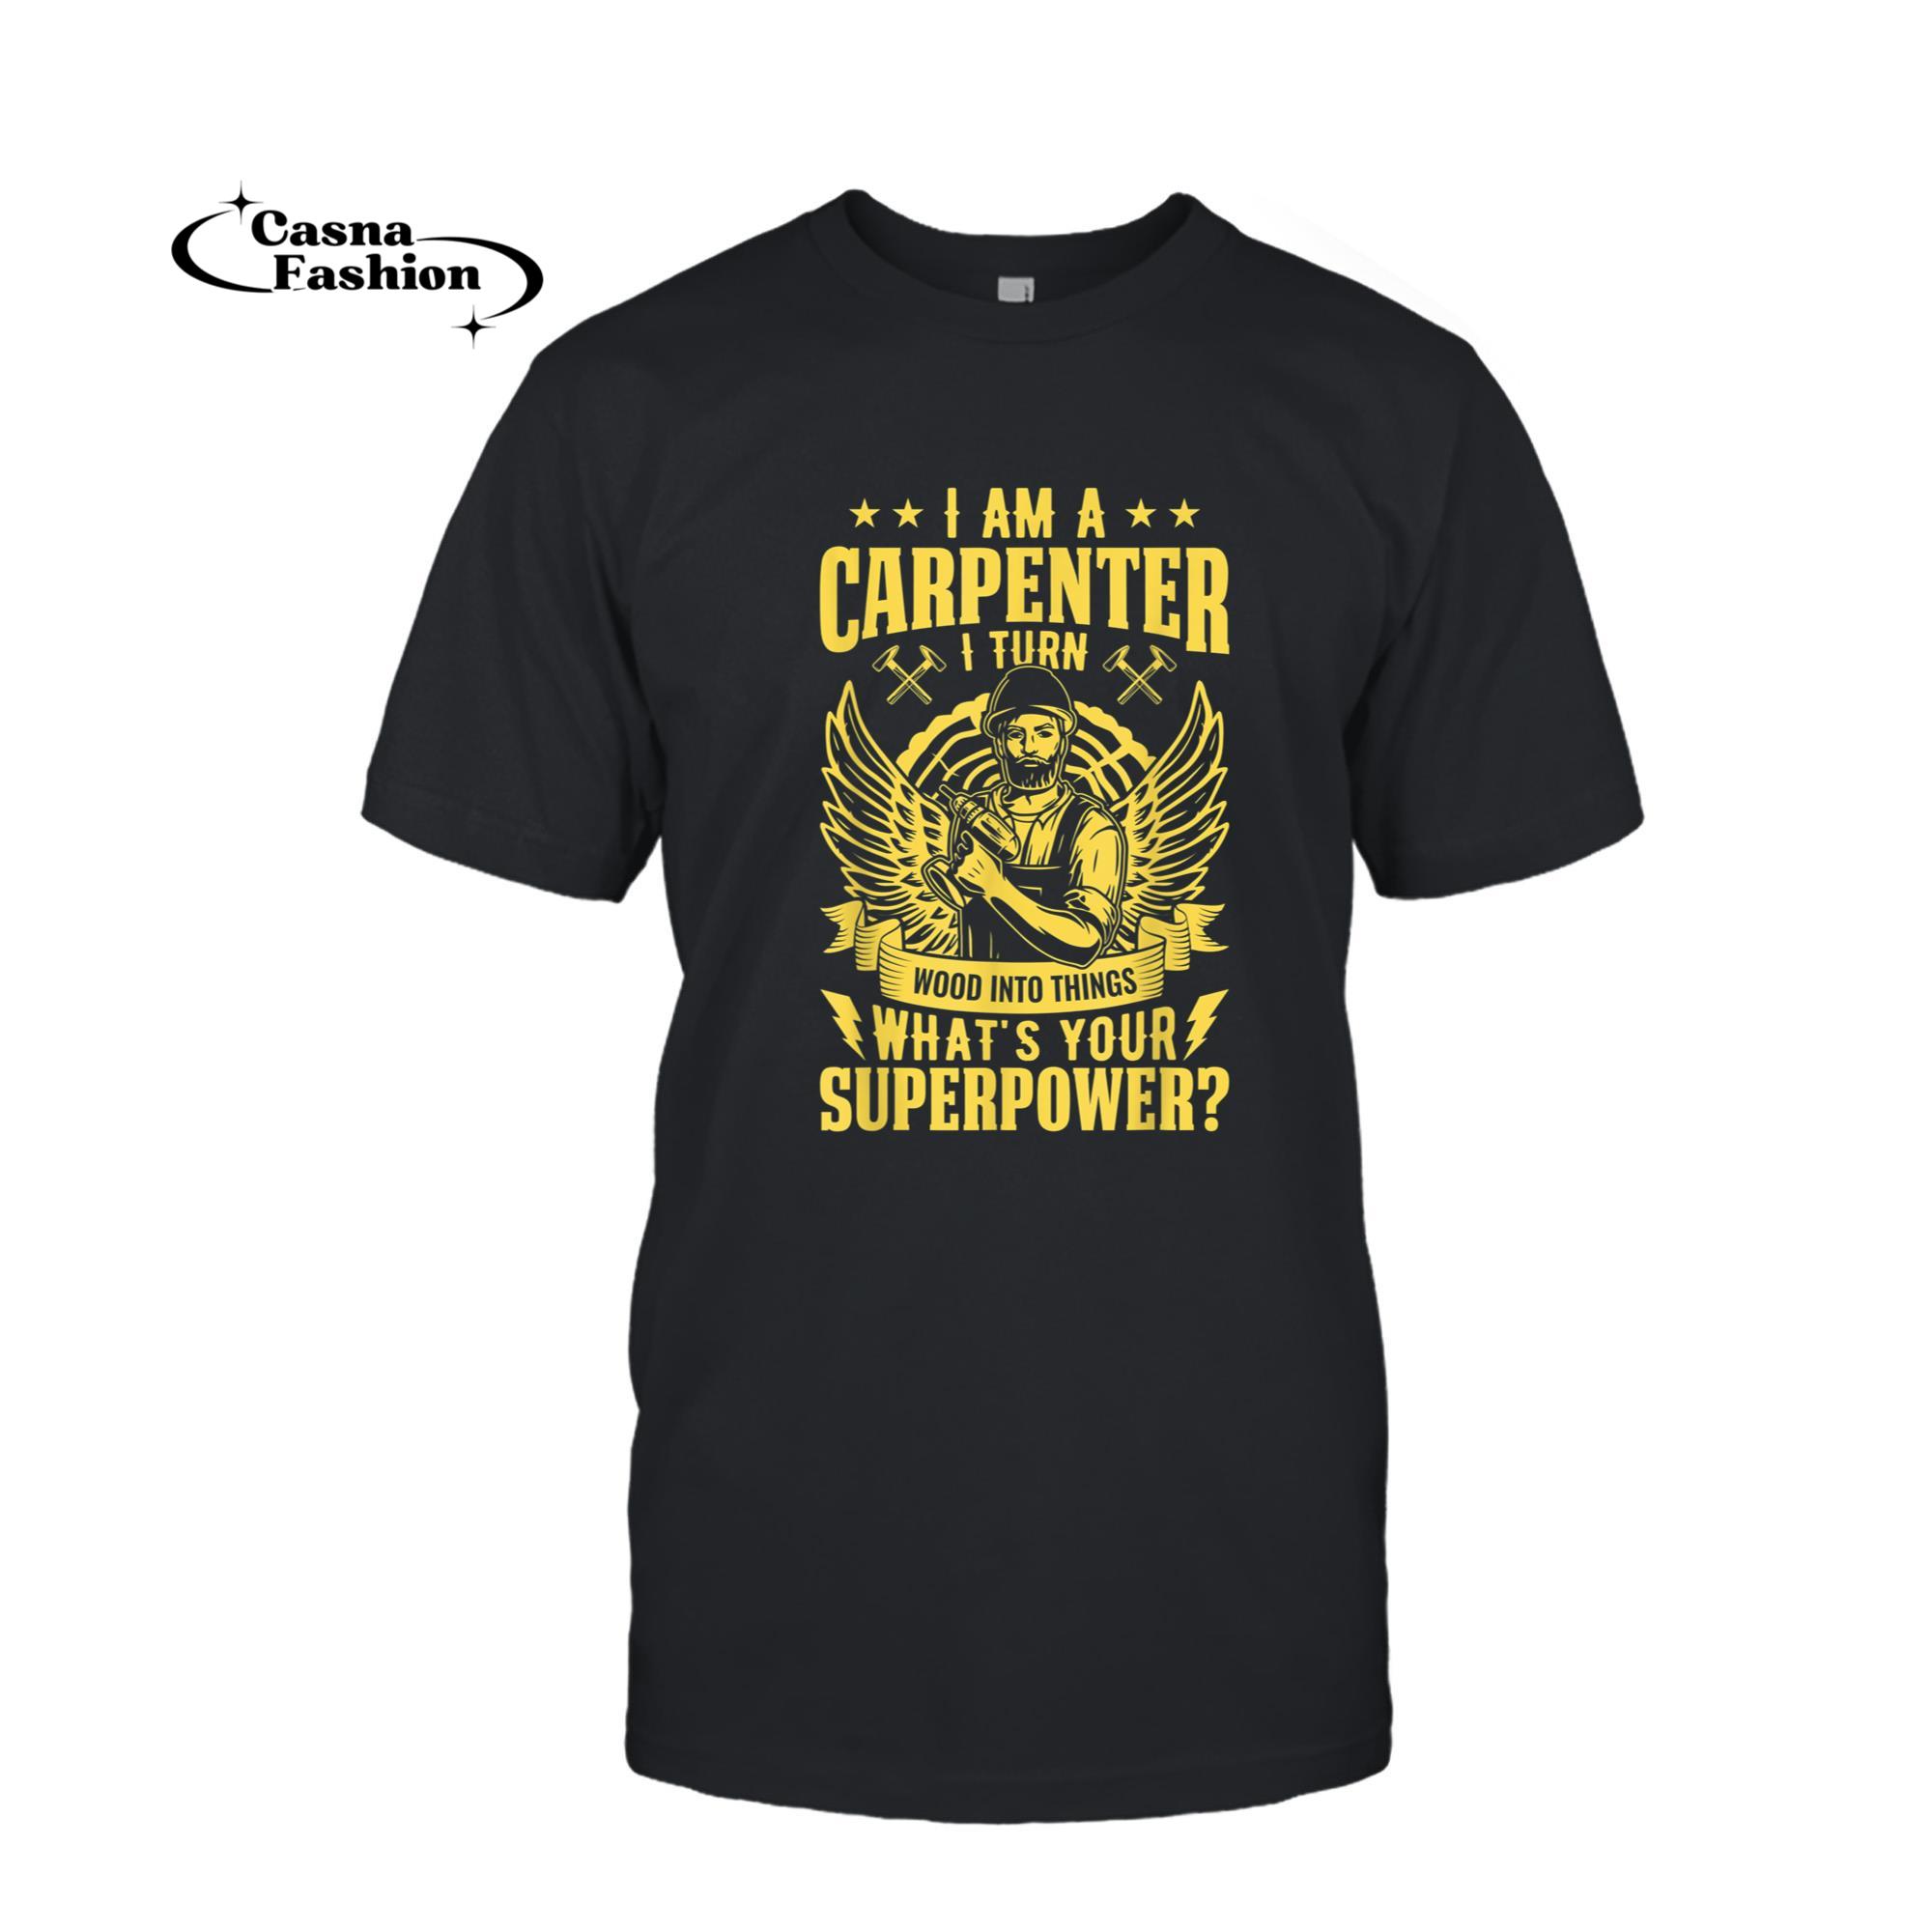 casnafashion_T-shirt_I Am A Carpenter I Turn Wood Into Things Your Superpower_ T-Shirt_T-shirt_Black